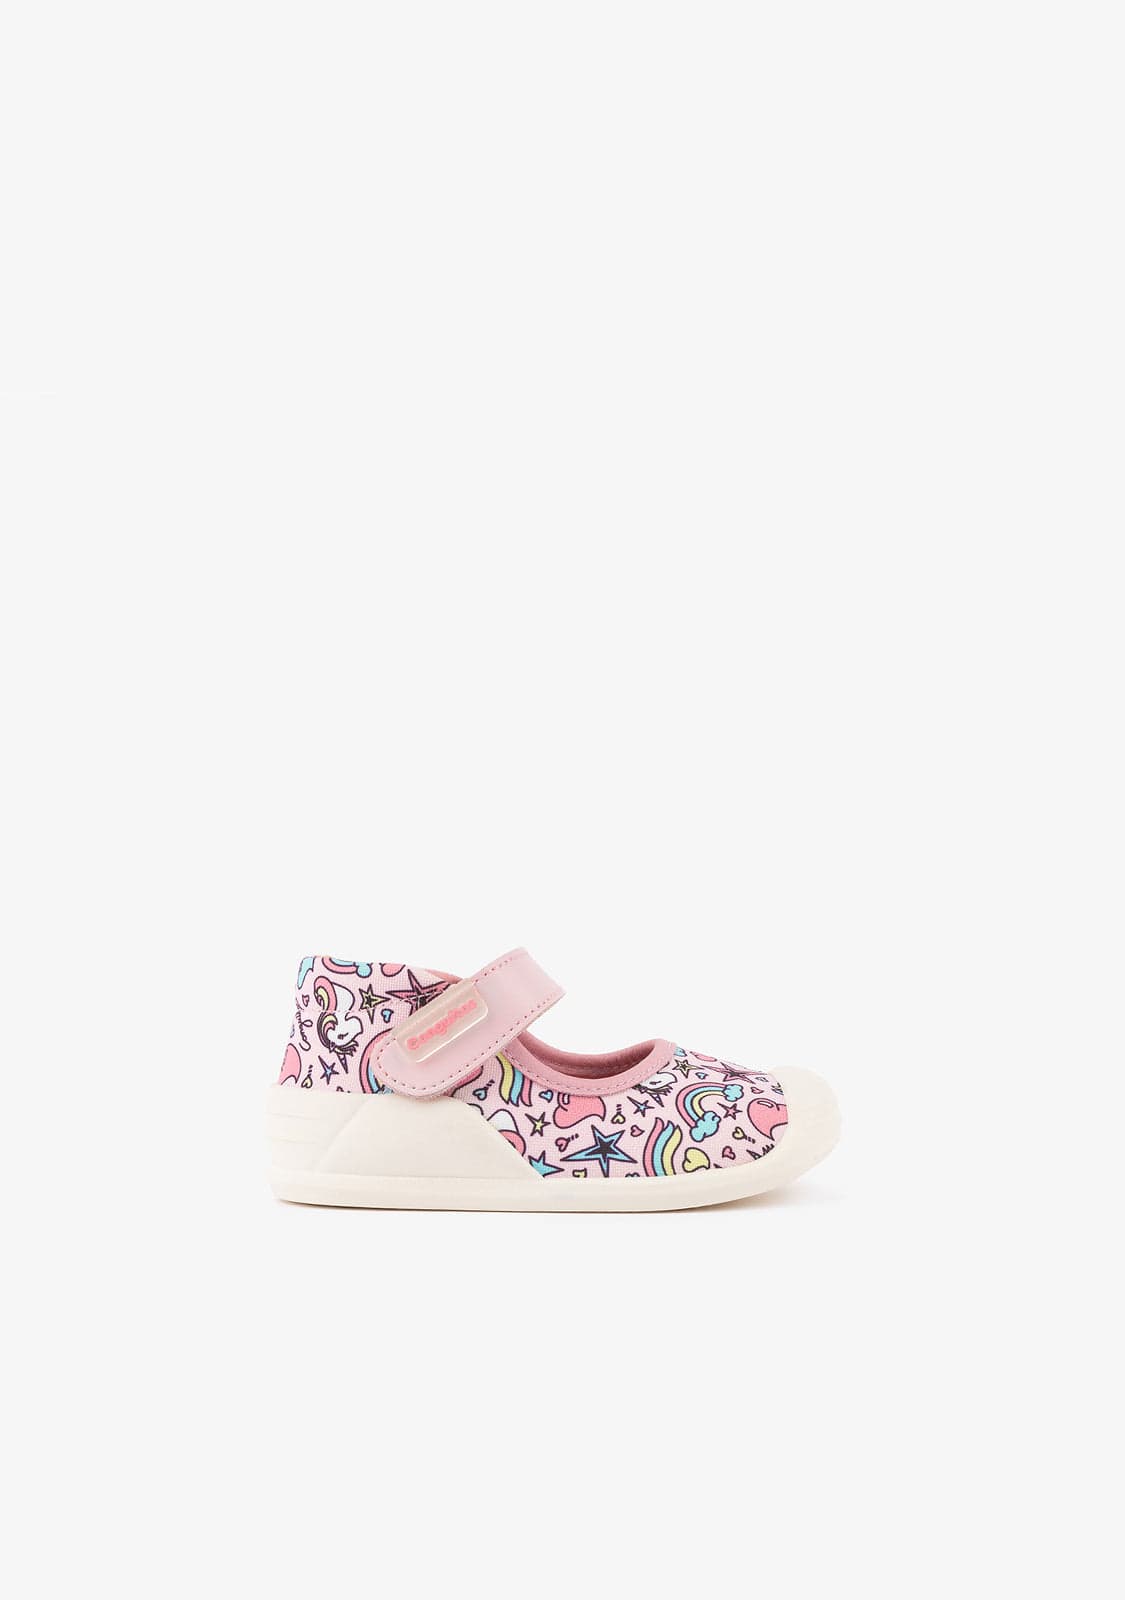 CONGUITOS Shoes Baby's Pink First Steps Unicorn Mary Janes